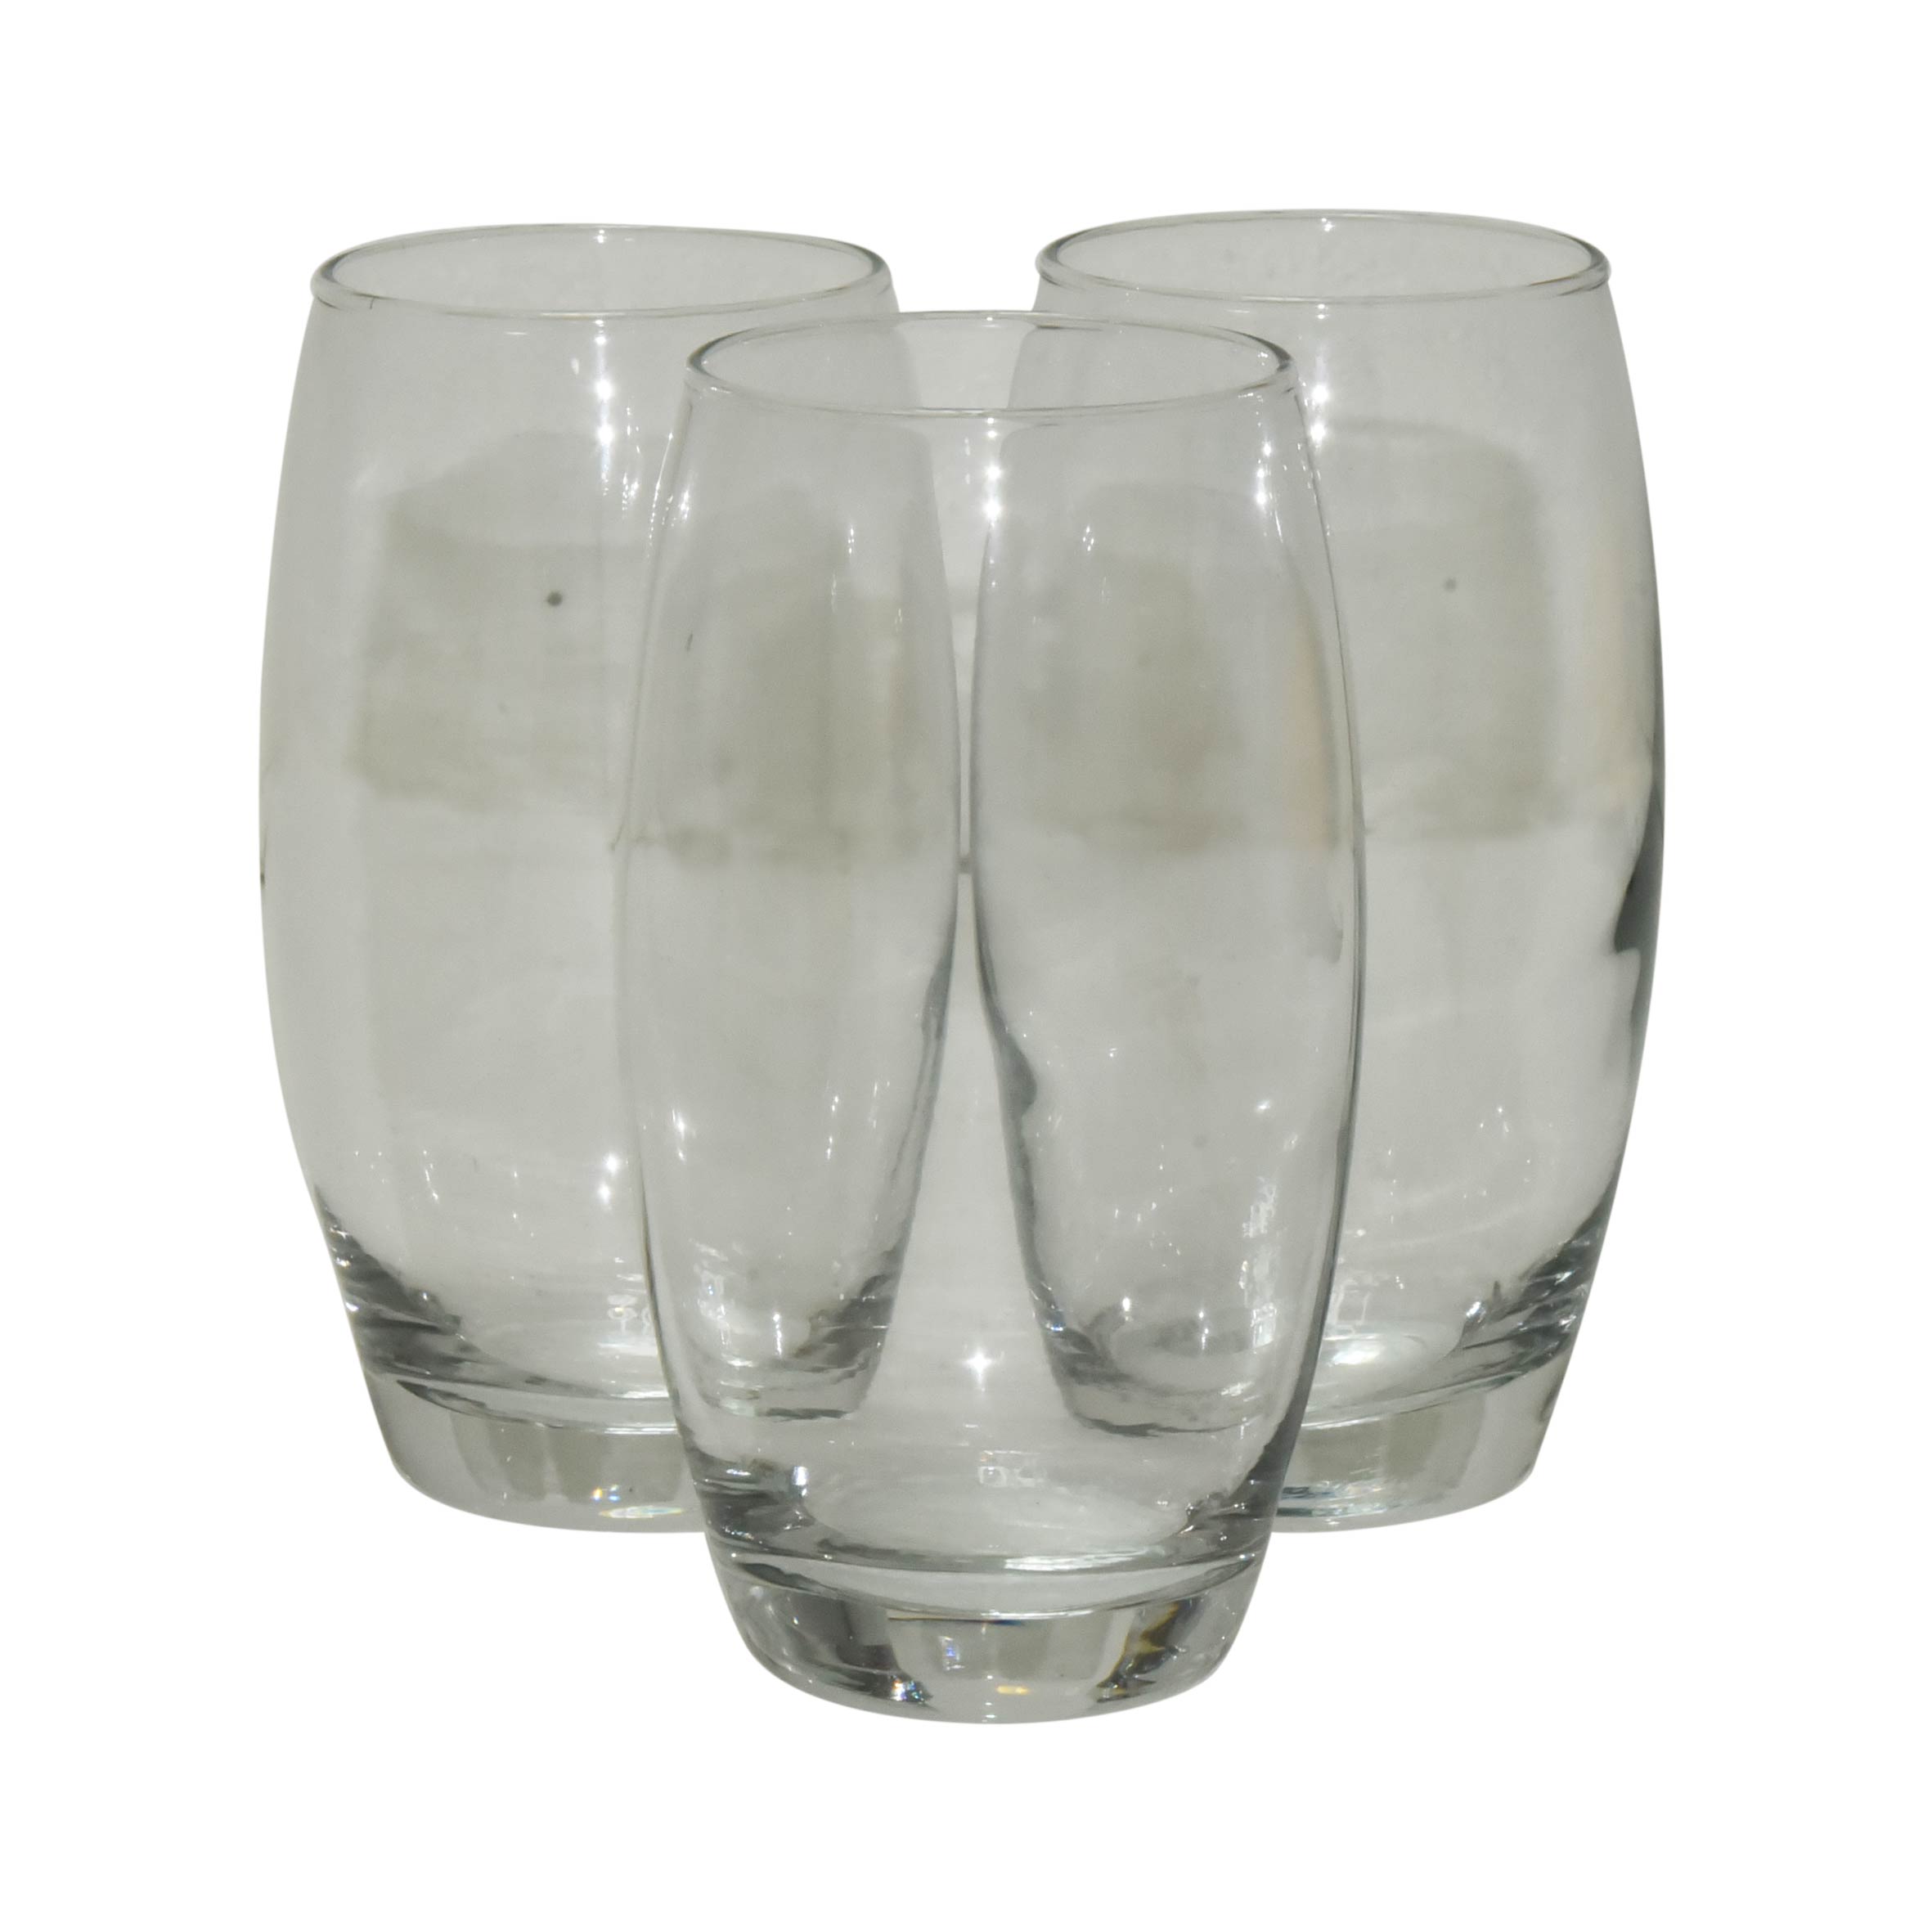 Drinking Glass Cup - KaroutExpress